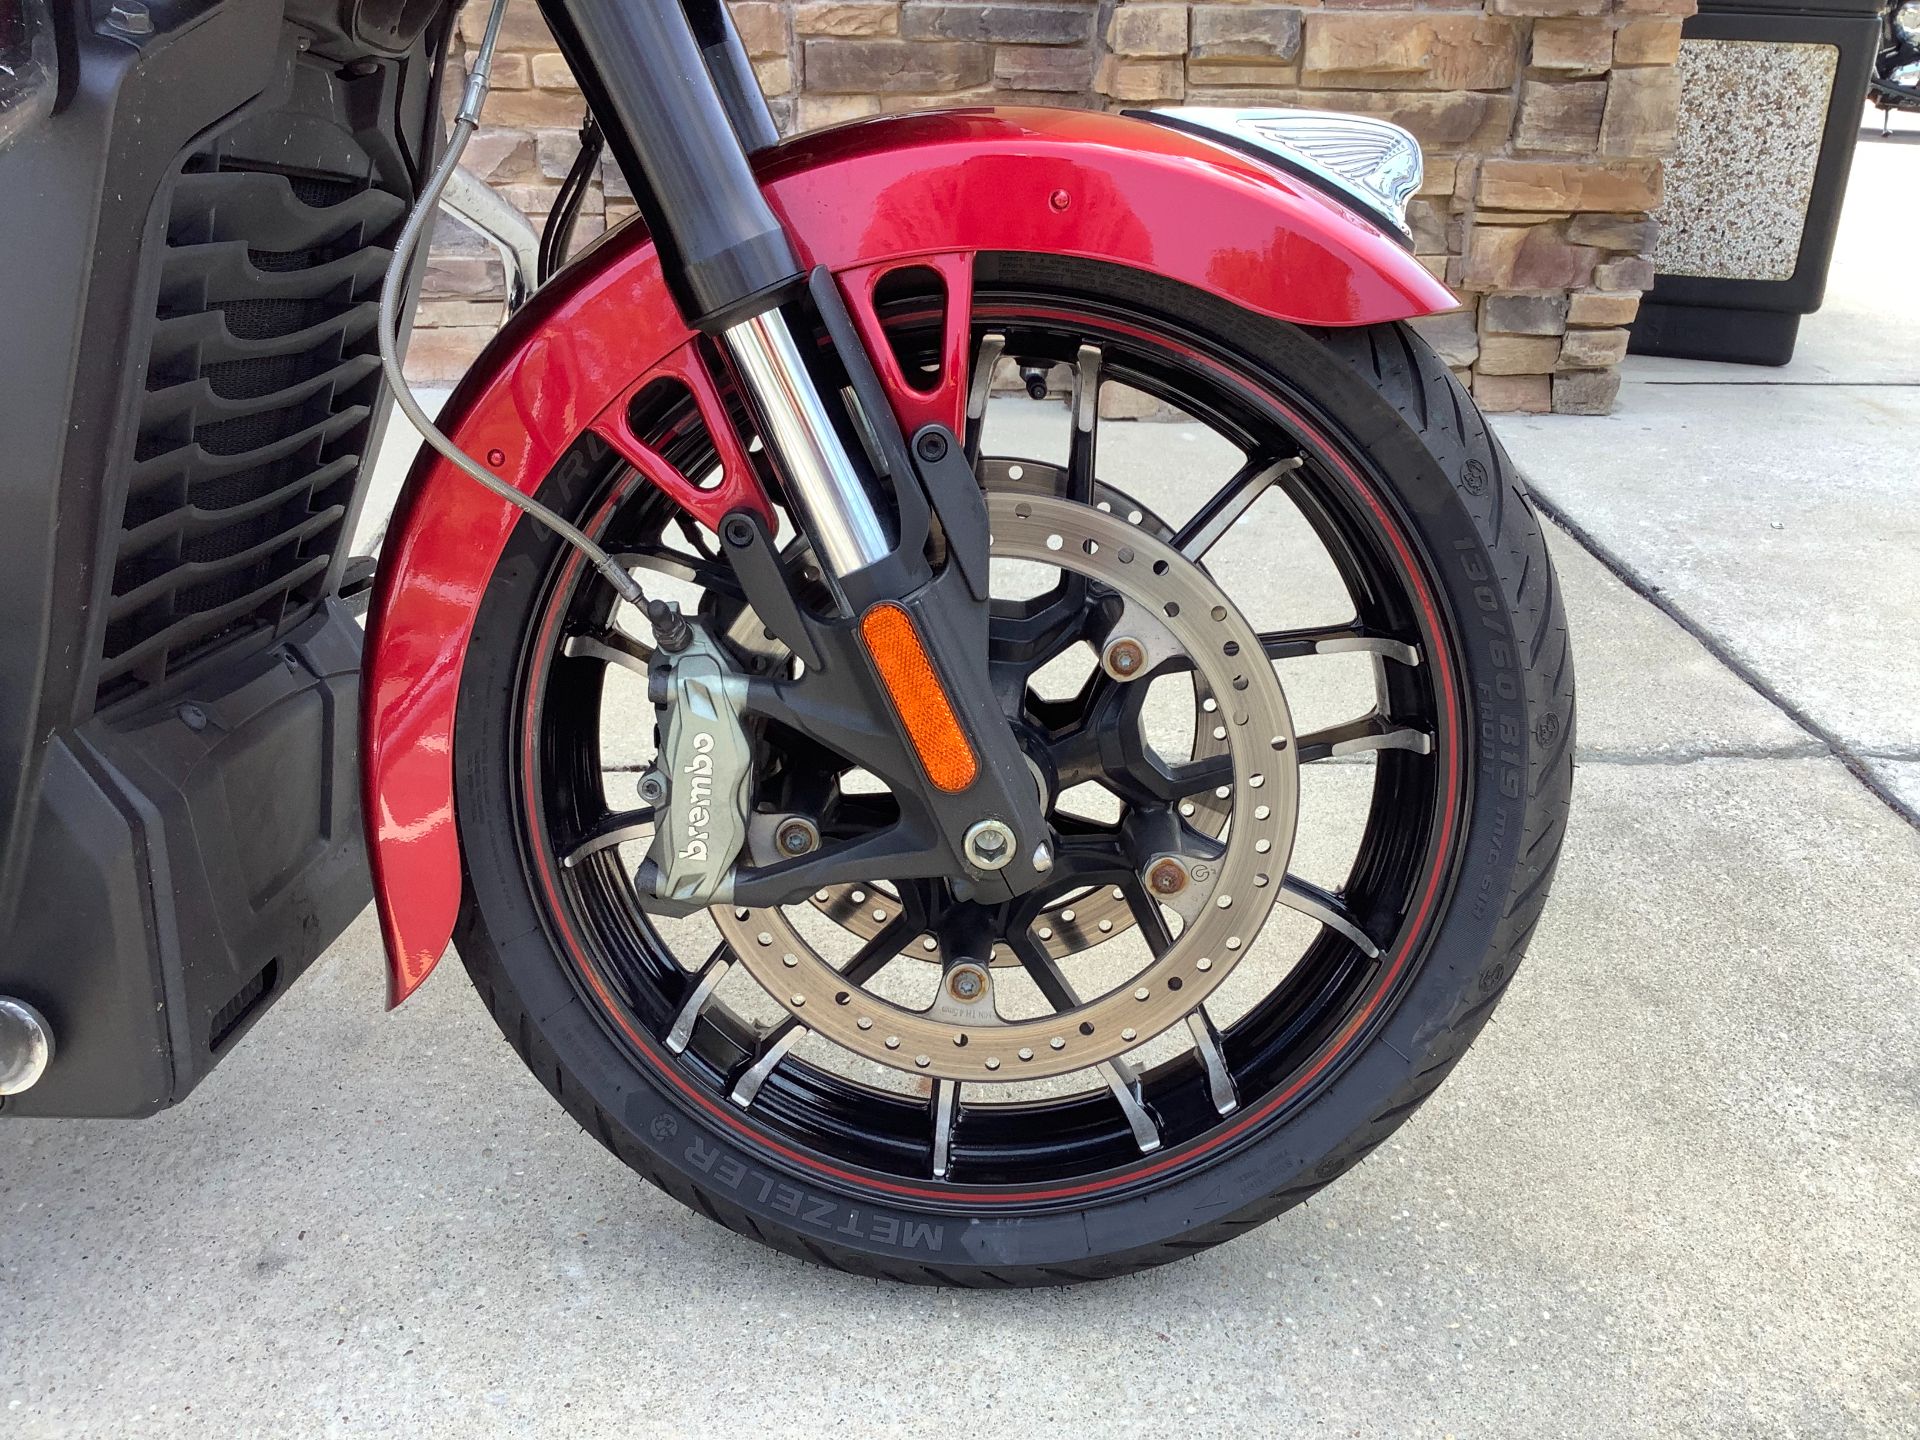 2020 Indian Motorcycle CLALLENGER LIMITED in Panama City Beach, Florida - Photo 6